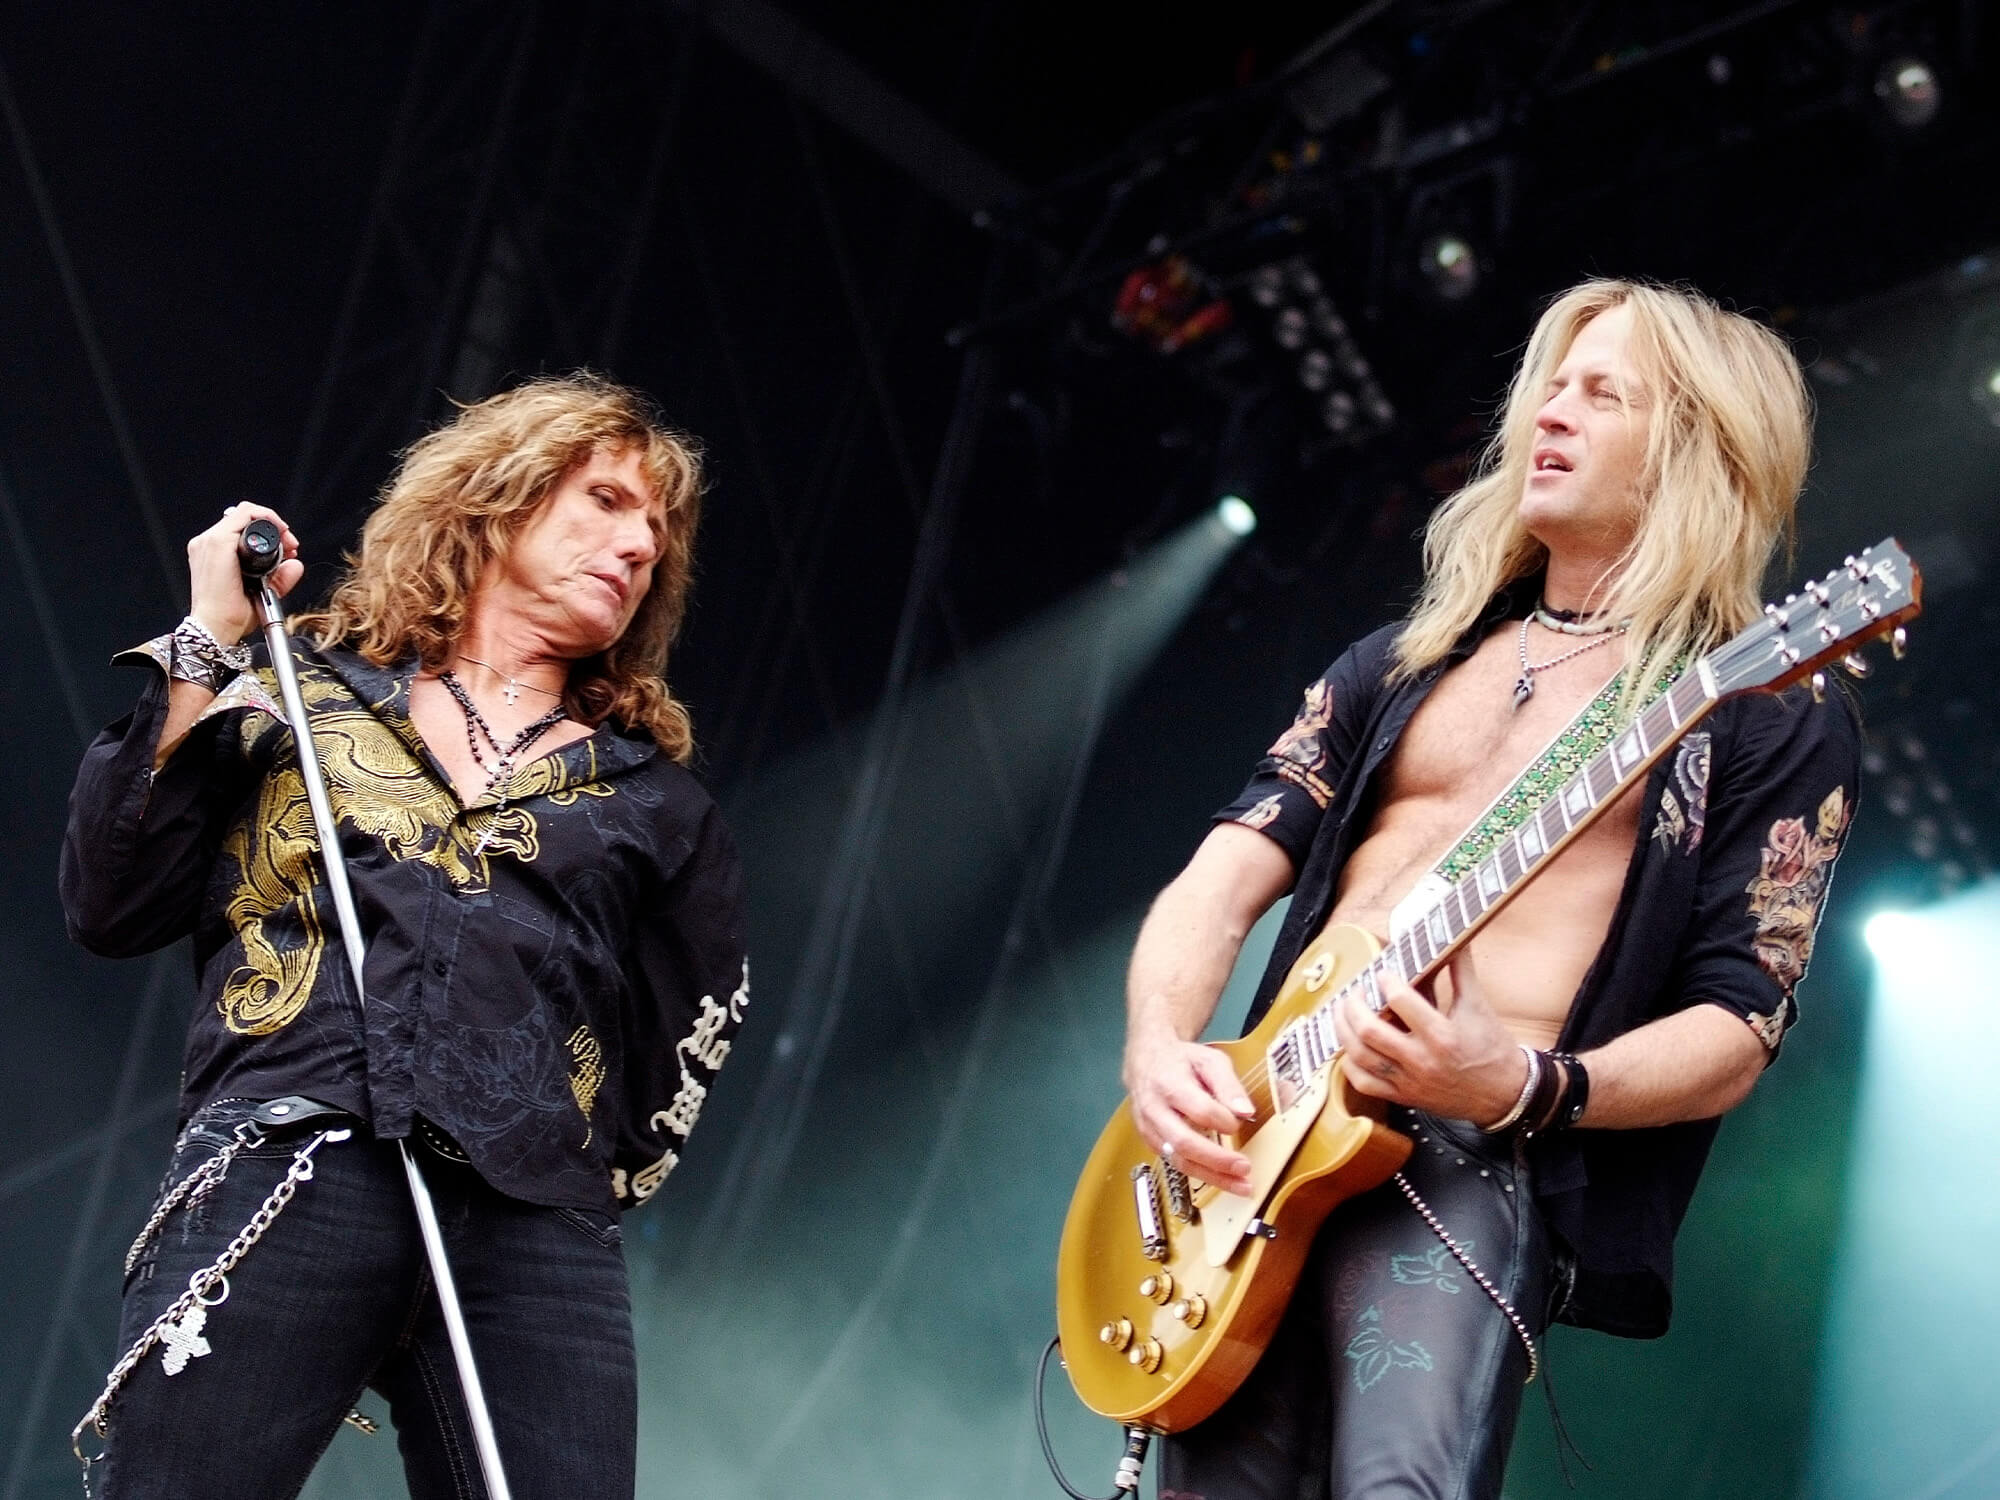 David Coverdale holding a microphone attached to a stand. He's looking at Doug Aldrich who is playing a Les Paul guitar